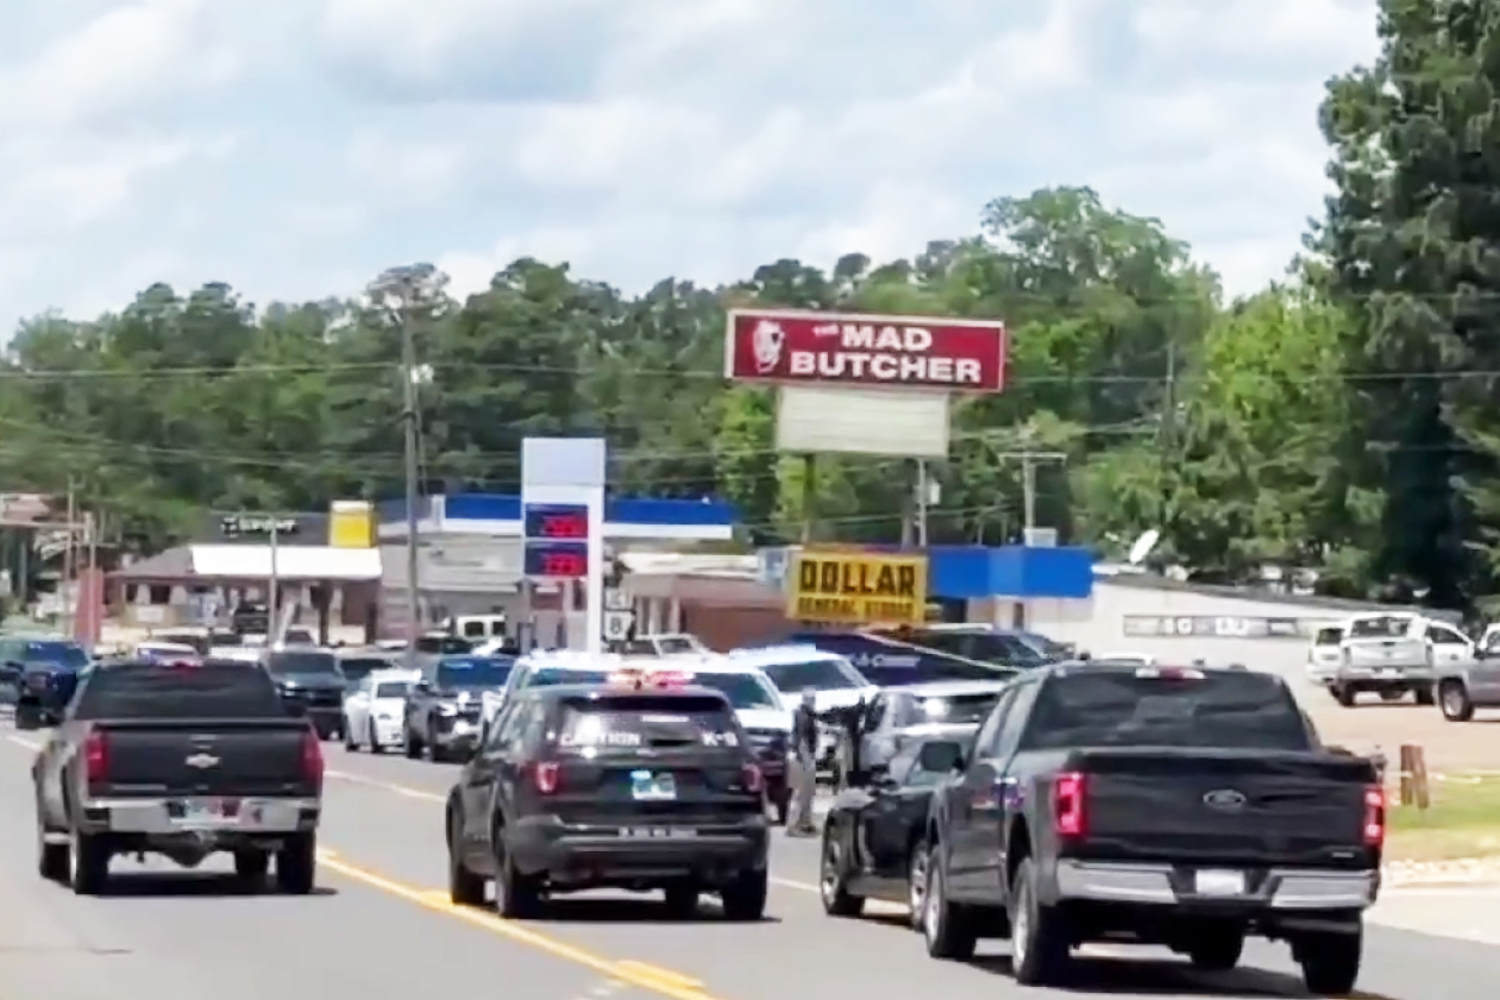 Police announce fourth death in Arkansas grocery store shooting